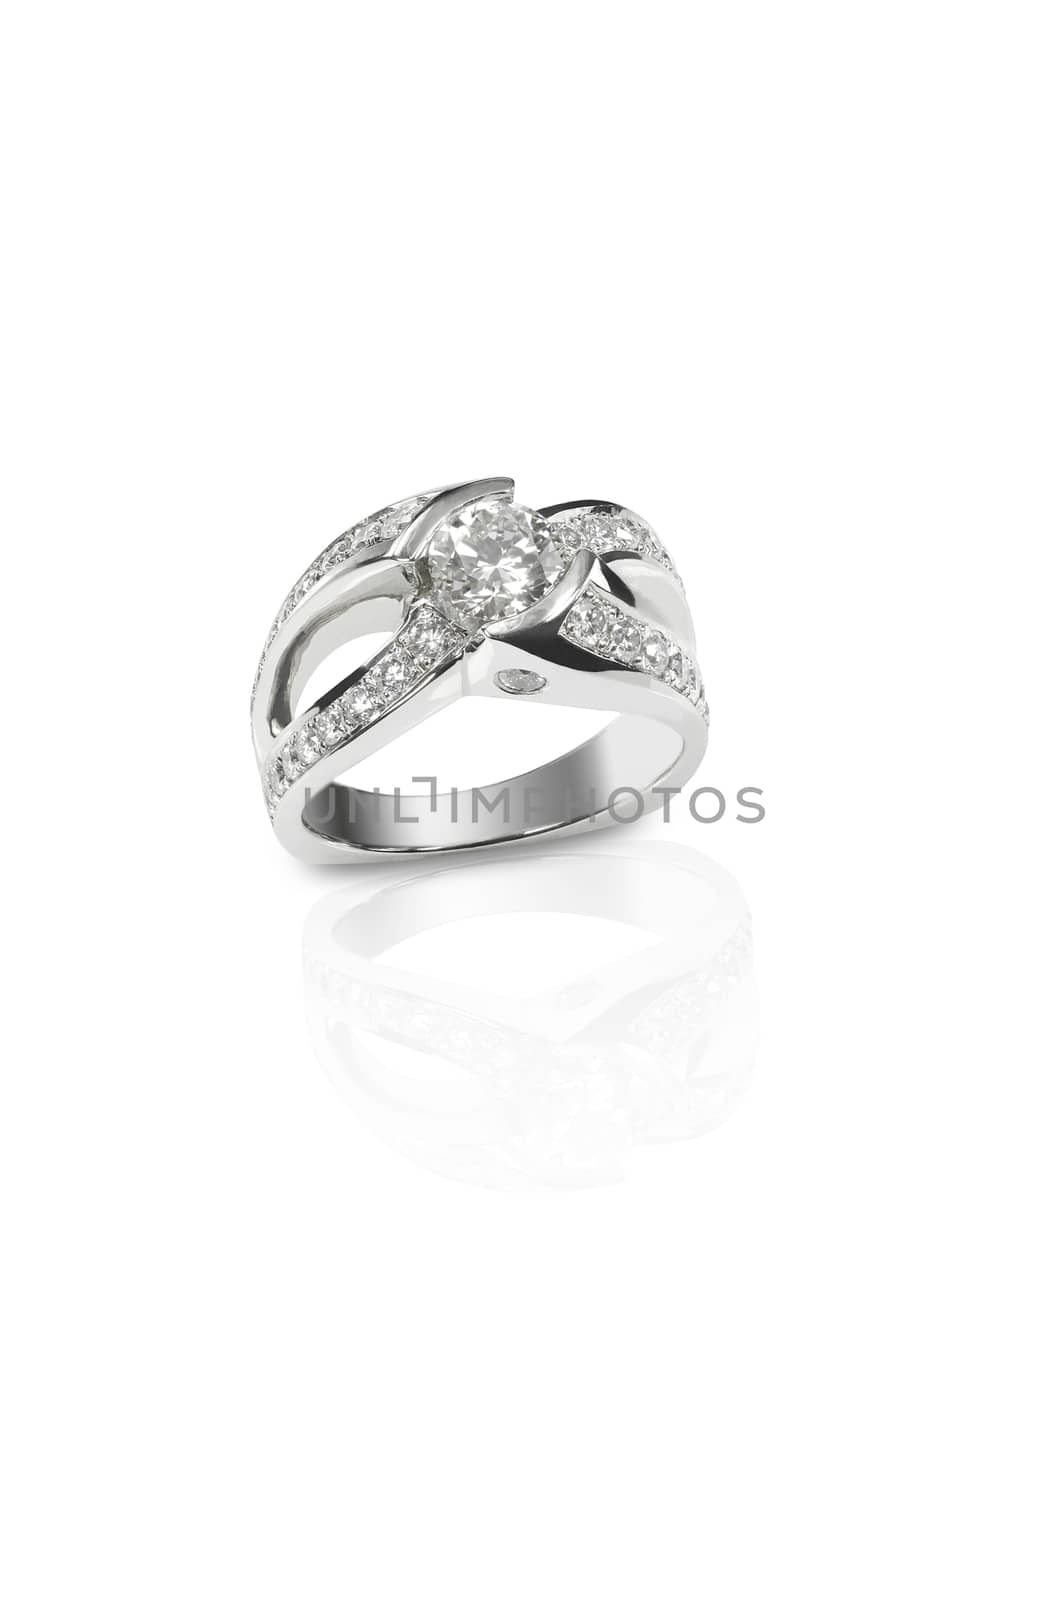 Diamond encrusted engagment wedding anniversary ring isolated on a white background with a reflection